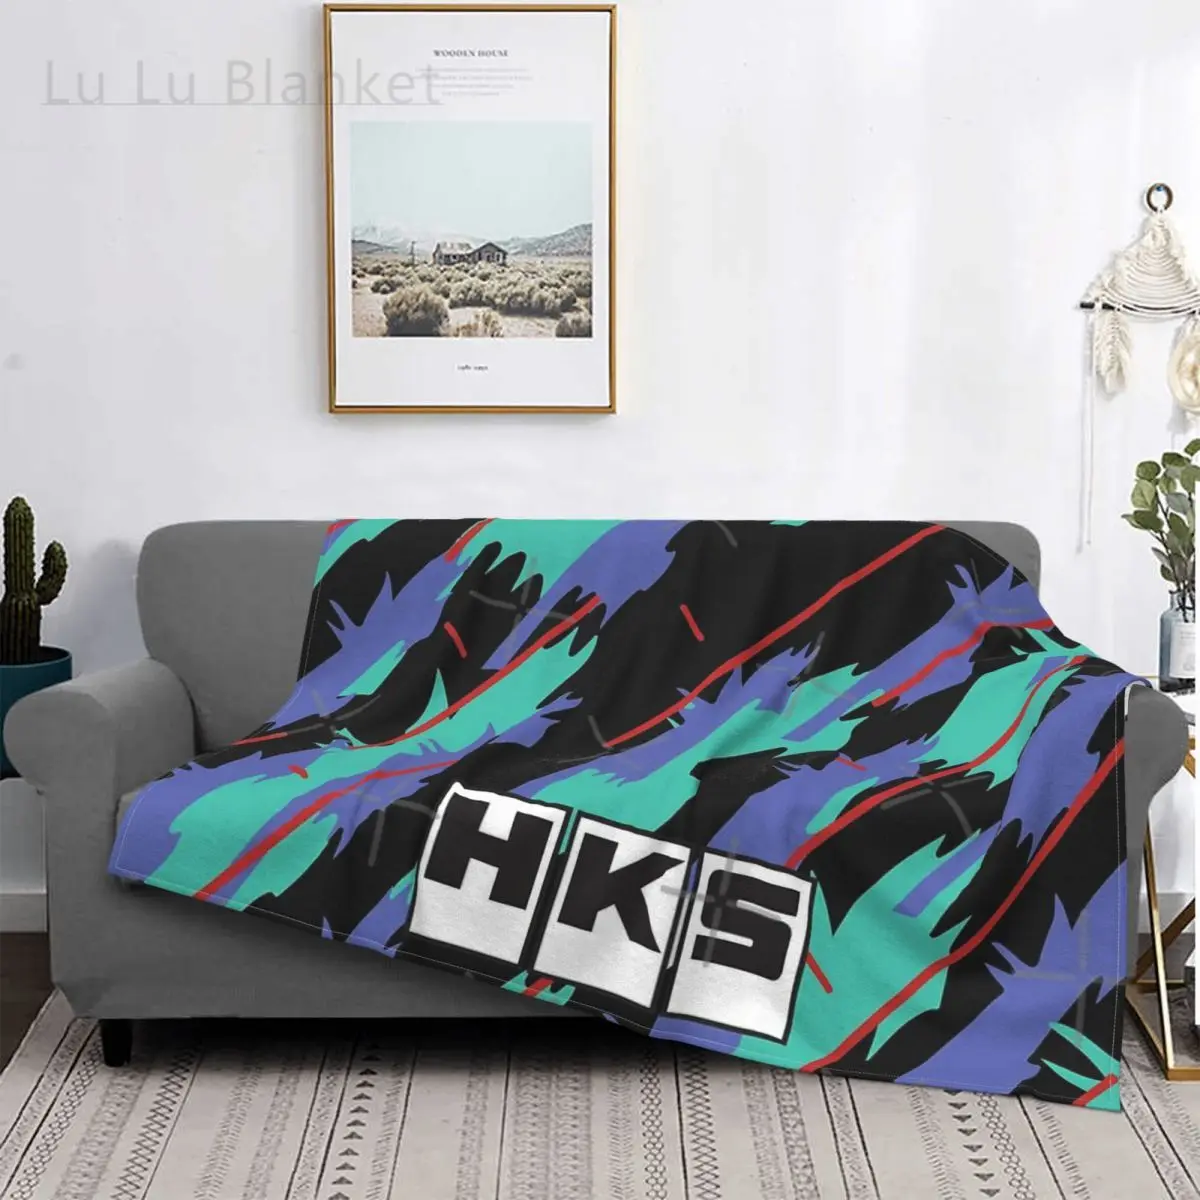 

Hks Retro Pattern Throw Blanket Sofa Bed Queen Winter Quilted Quilts Comforters Children'S Blanket Juvenile Room